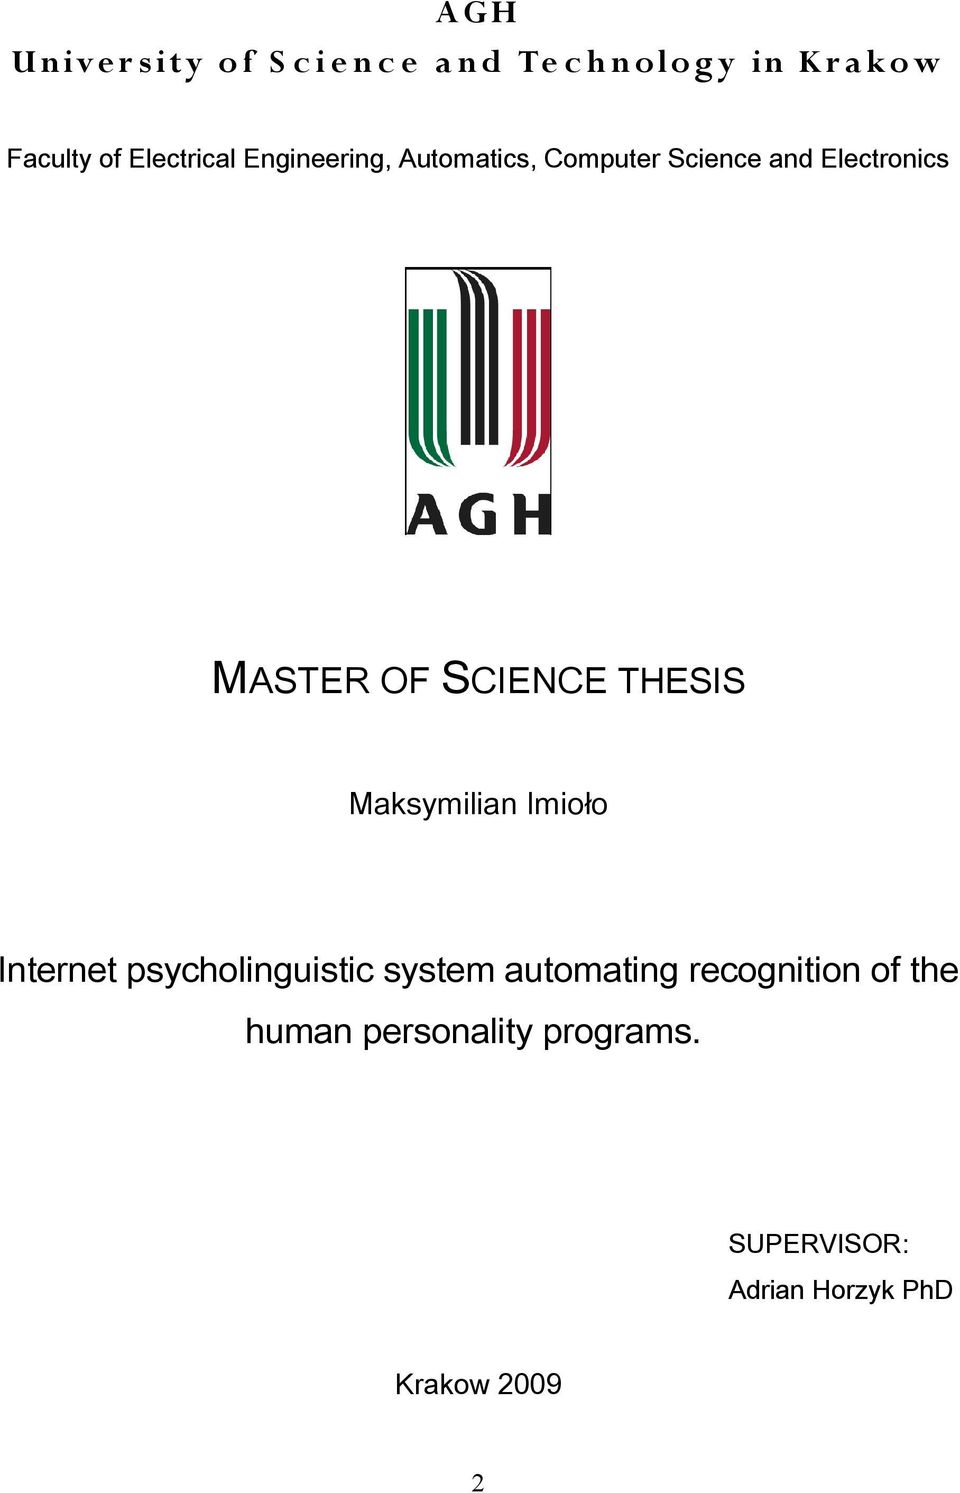 MASTER OF SCIENCE THESIS Maksymilian Imioło Internet psycholinguistic system